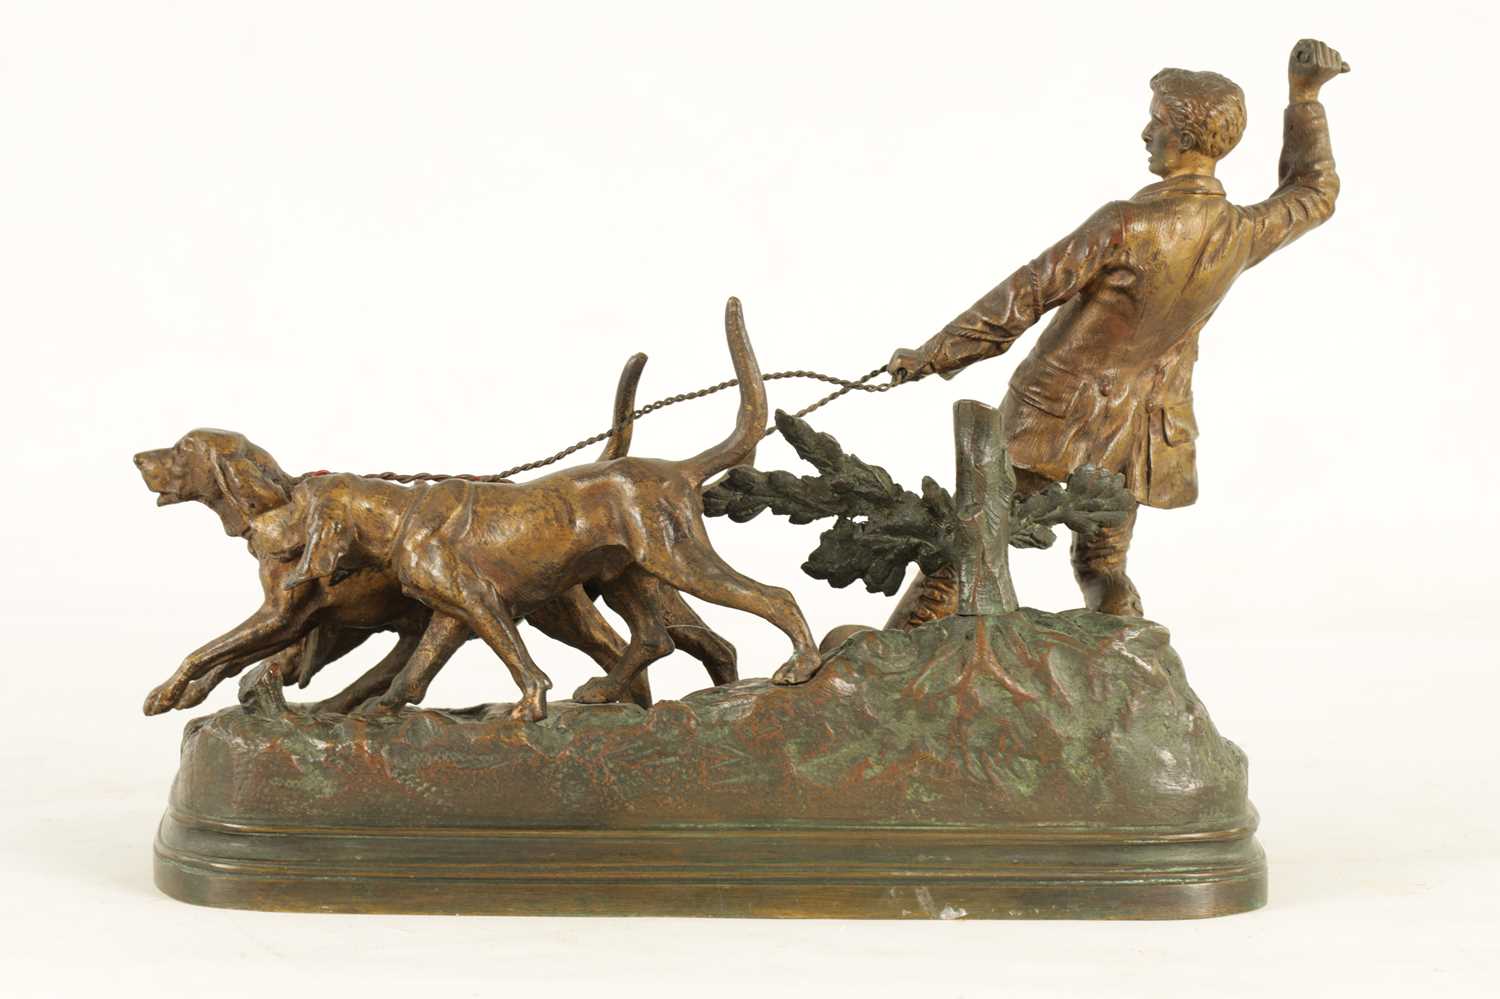 ALFRED DUBUCAND. A 19TH CENTURY FRENCH GILT AND PATINATED BRONZE SCULPTURE - Image 3 of 9